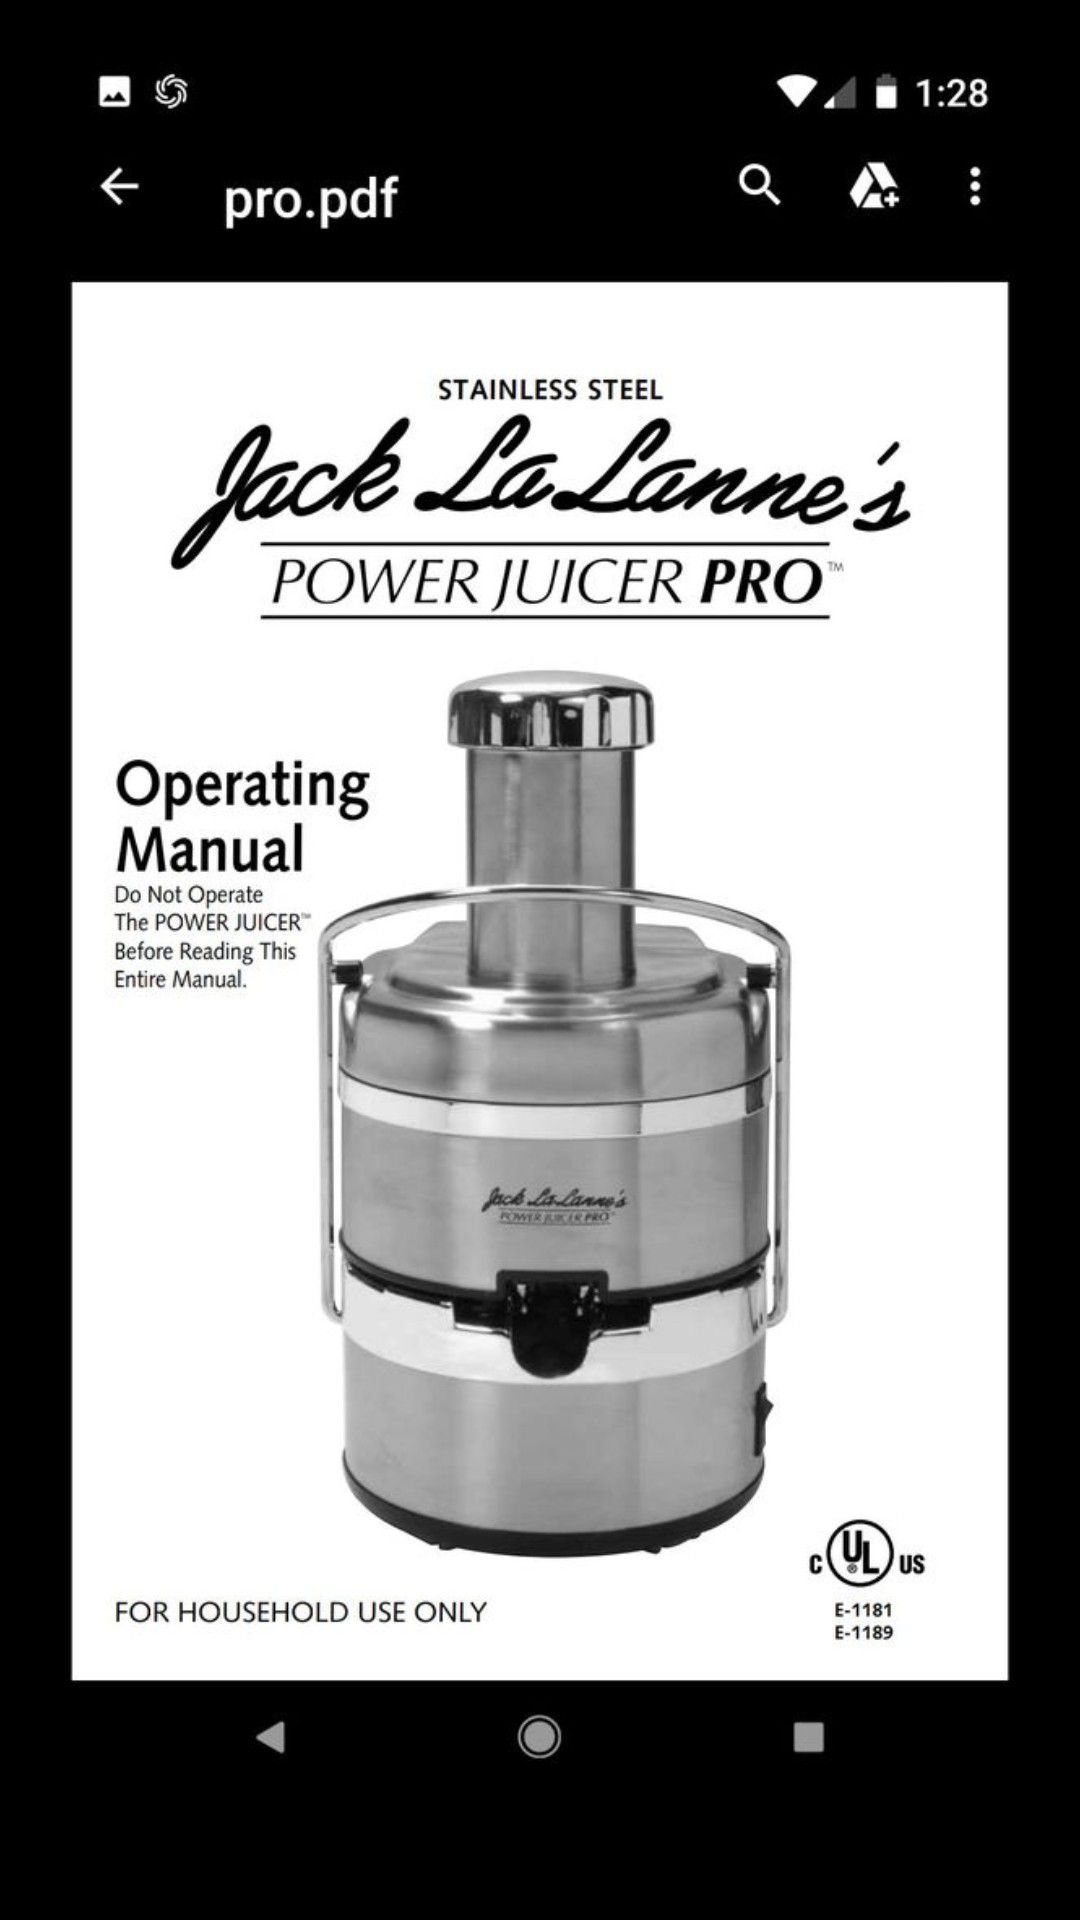 Jack LaLanne Power Juicer Pro E-1189 model for Sale in Tacoma, WA - OfferUp